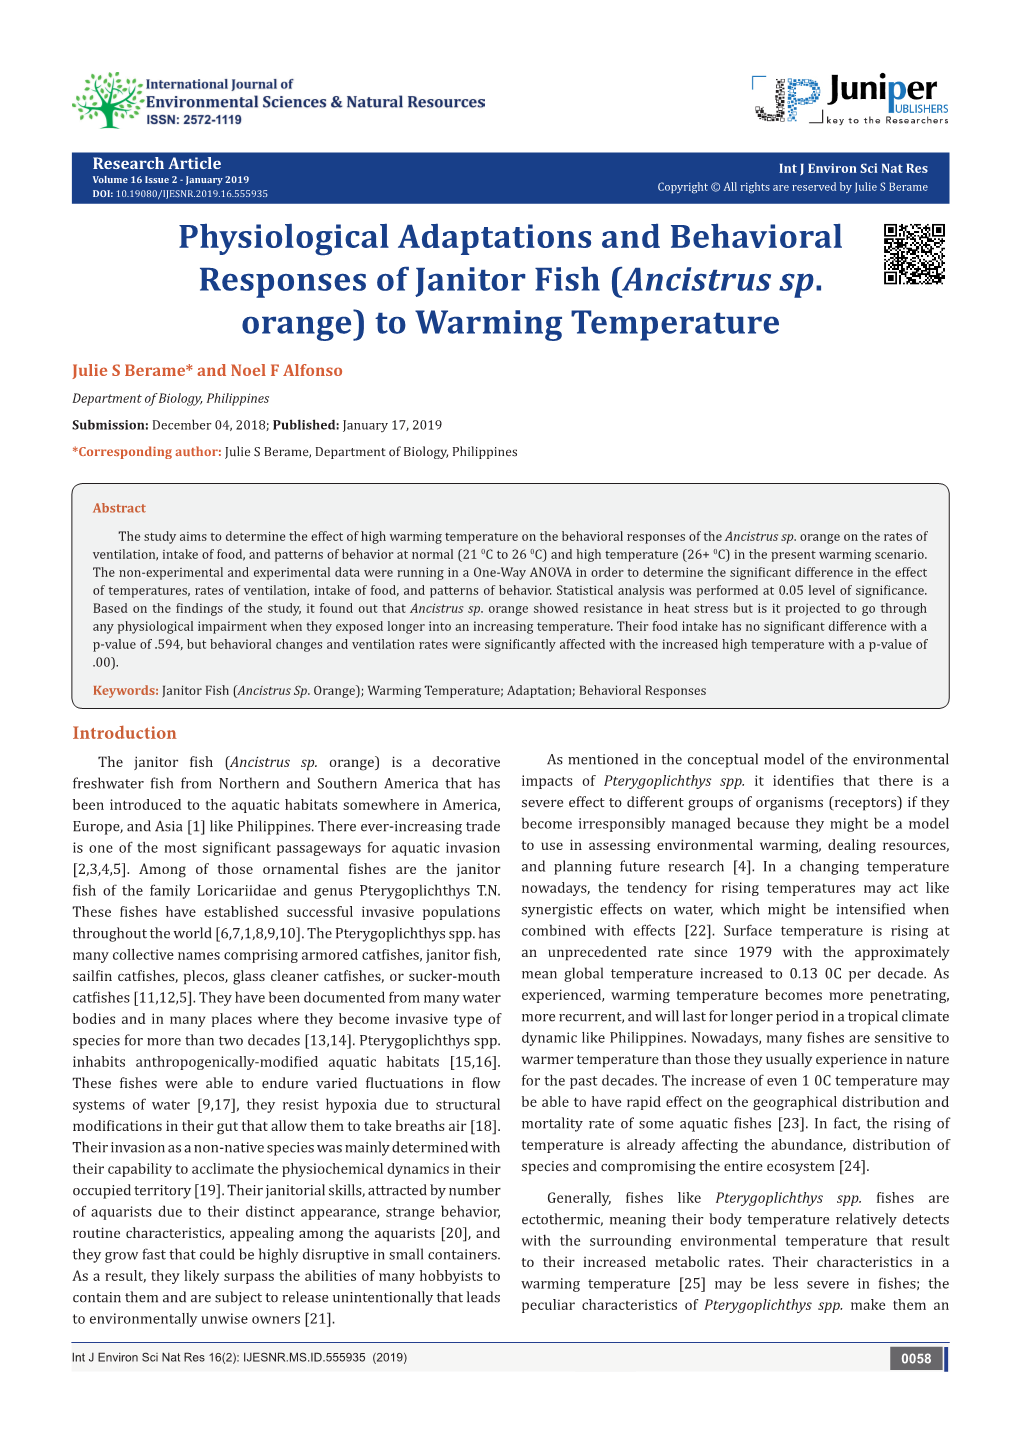 Physiological Adaptations and Behavioral Responses of Janitor Fish (Ancistrus Sp